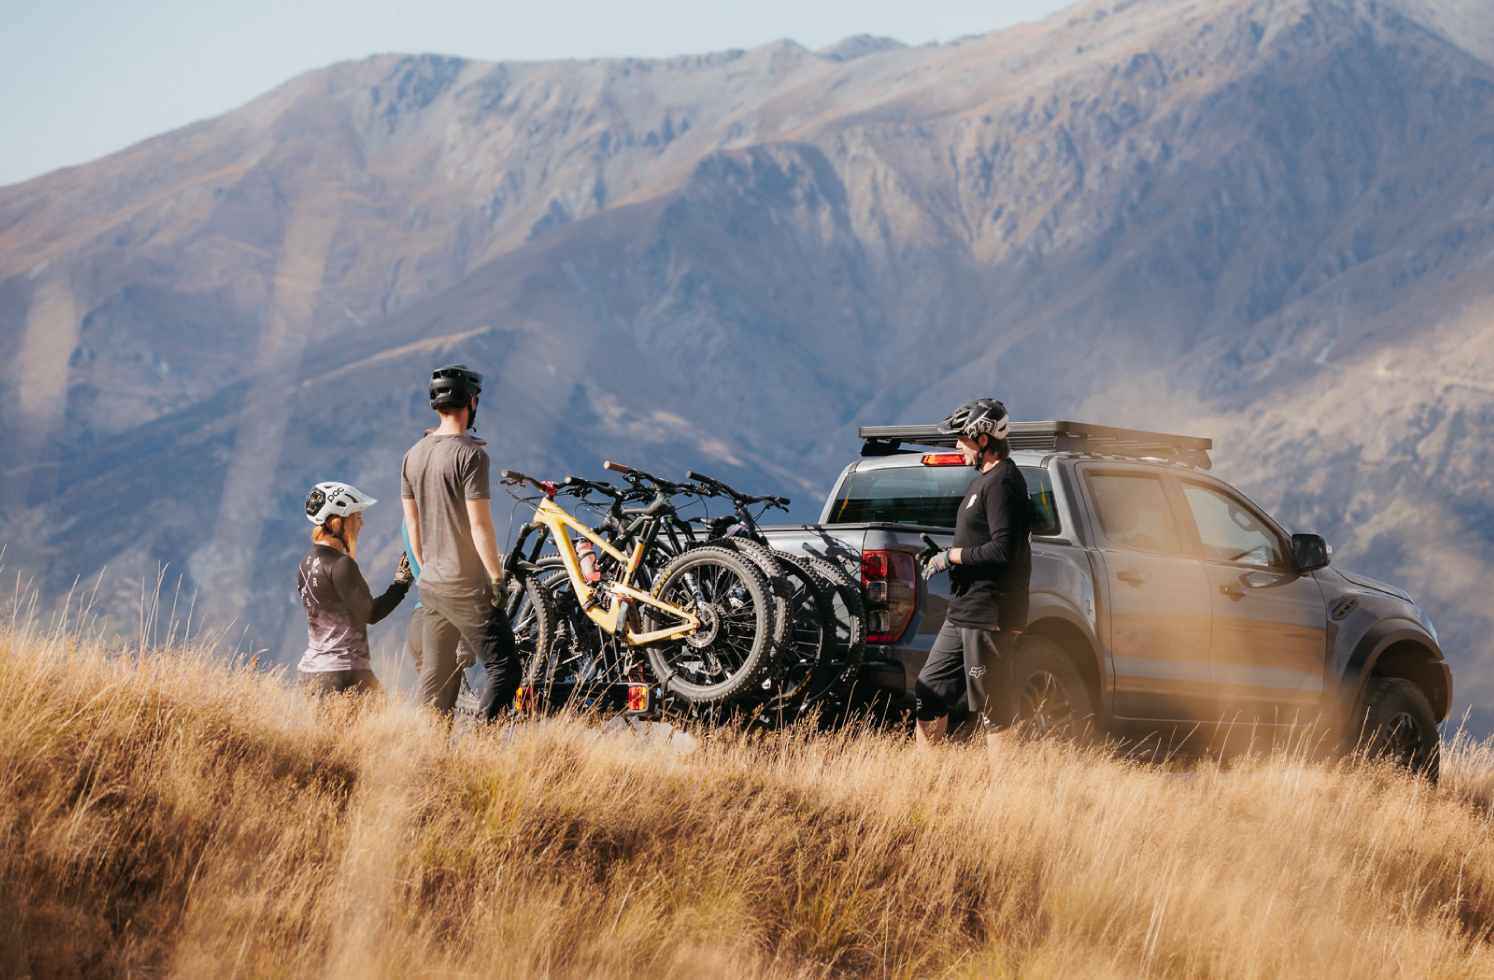 Mountain bike riders are standing around a ute with a platform bike rack on the towbar.